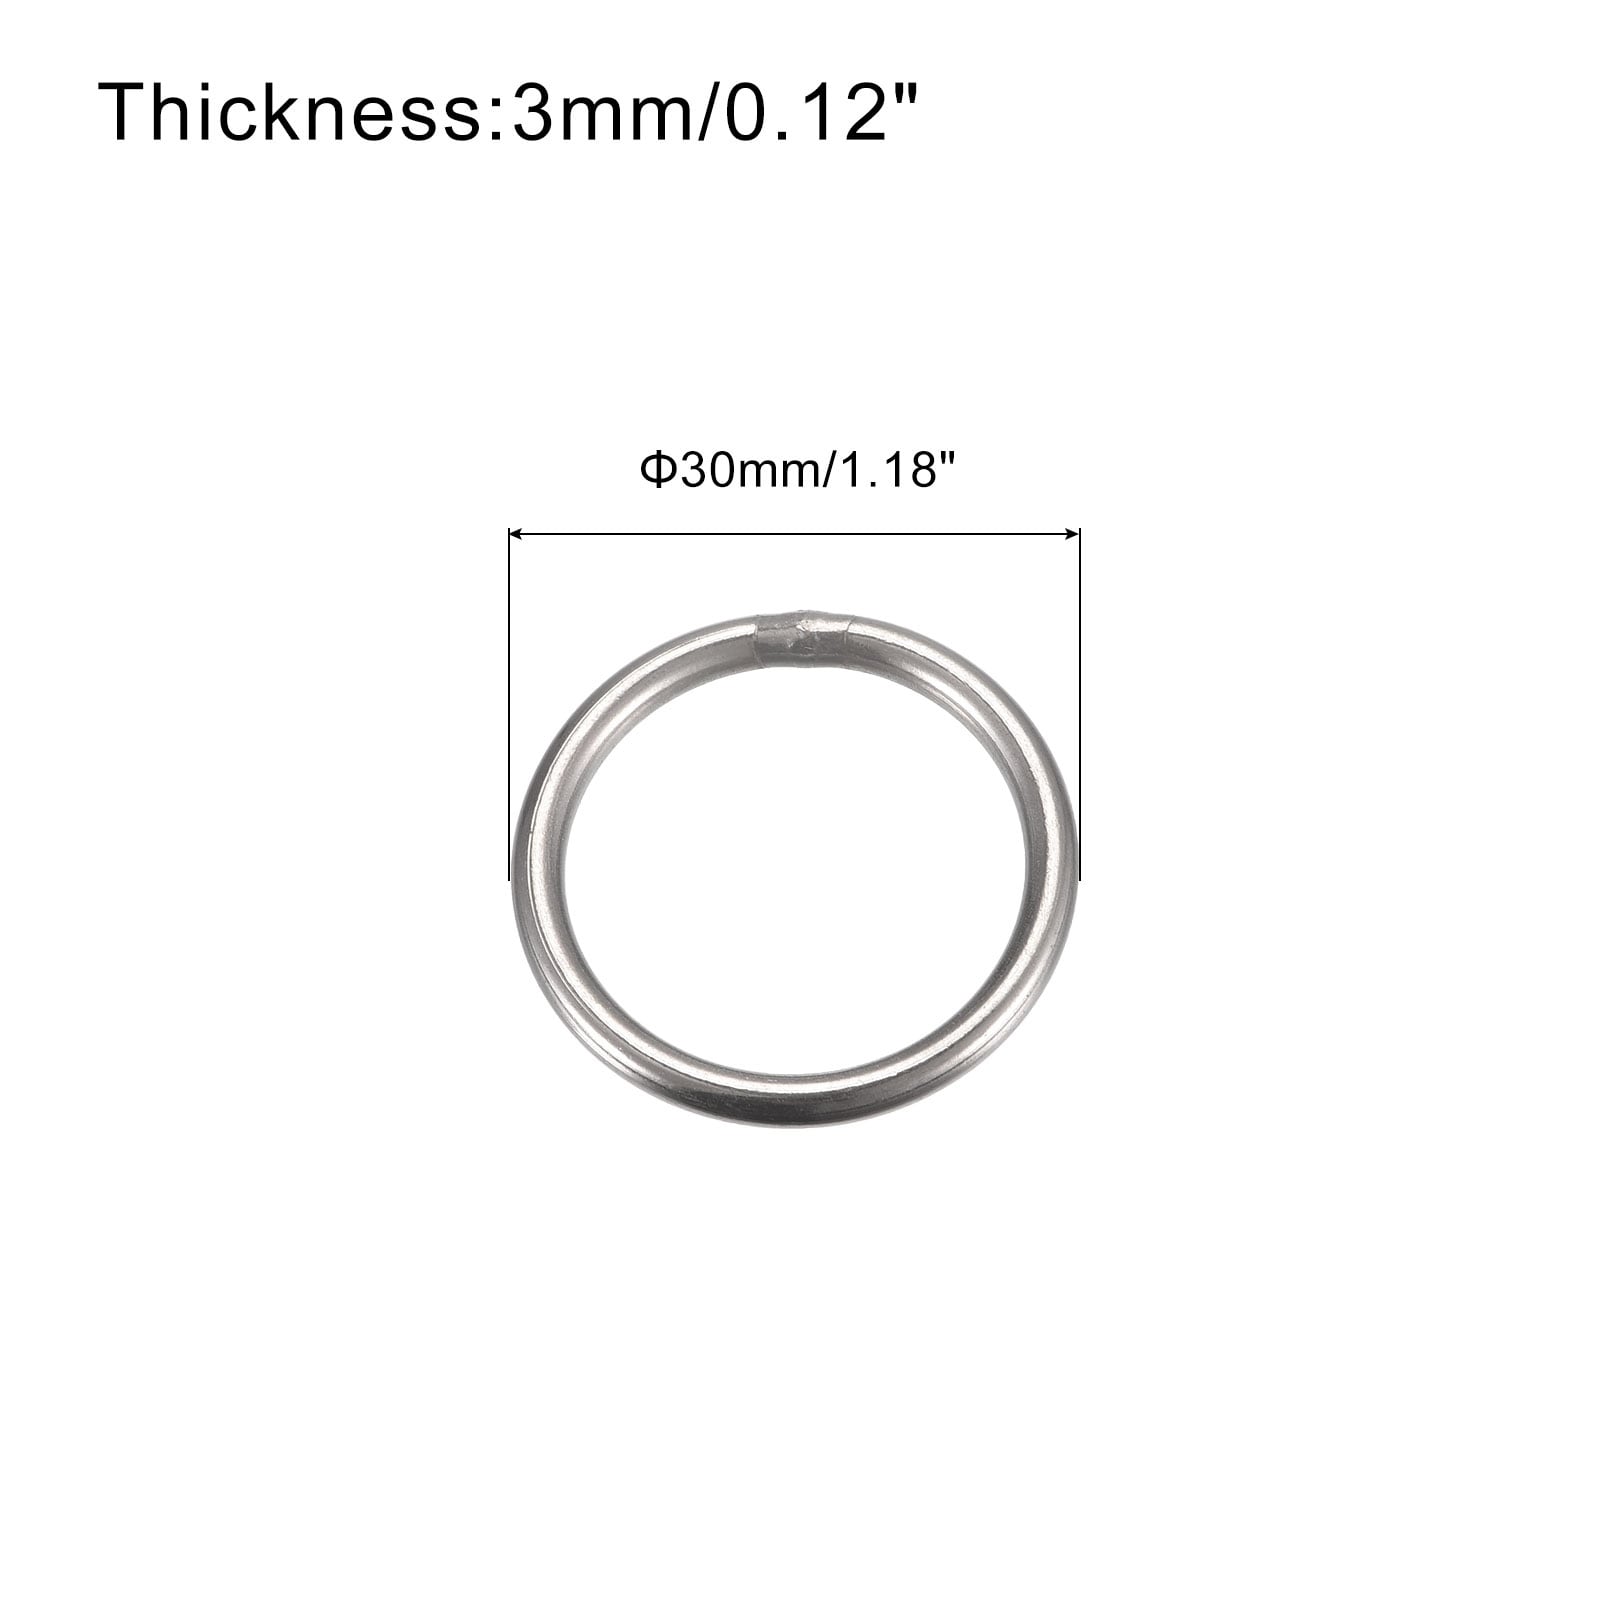 Unique Bargains Stainless Steel O Rings, Multi-Purpose Metal Welded O-Rings Round Ring - Silver Tone - 90x5mm, 5pcs